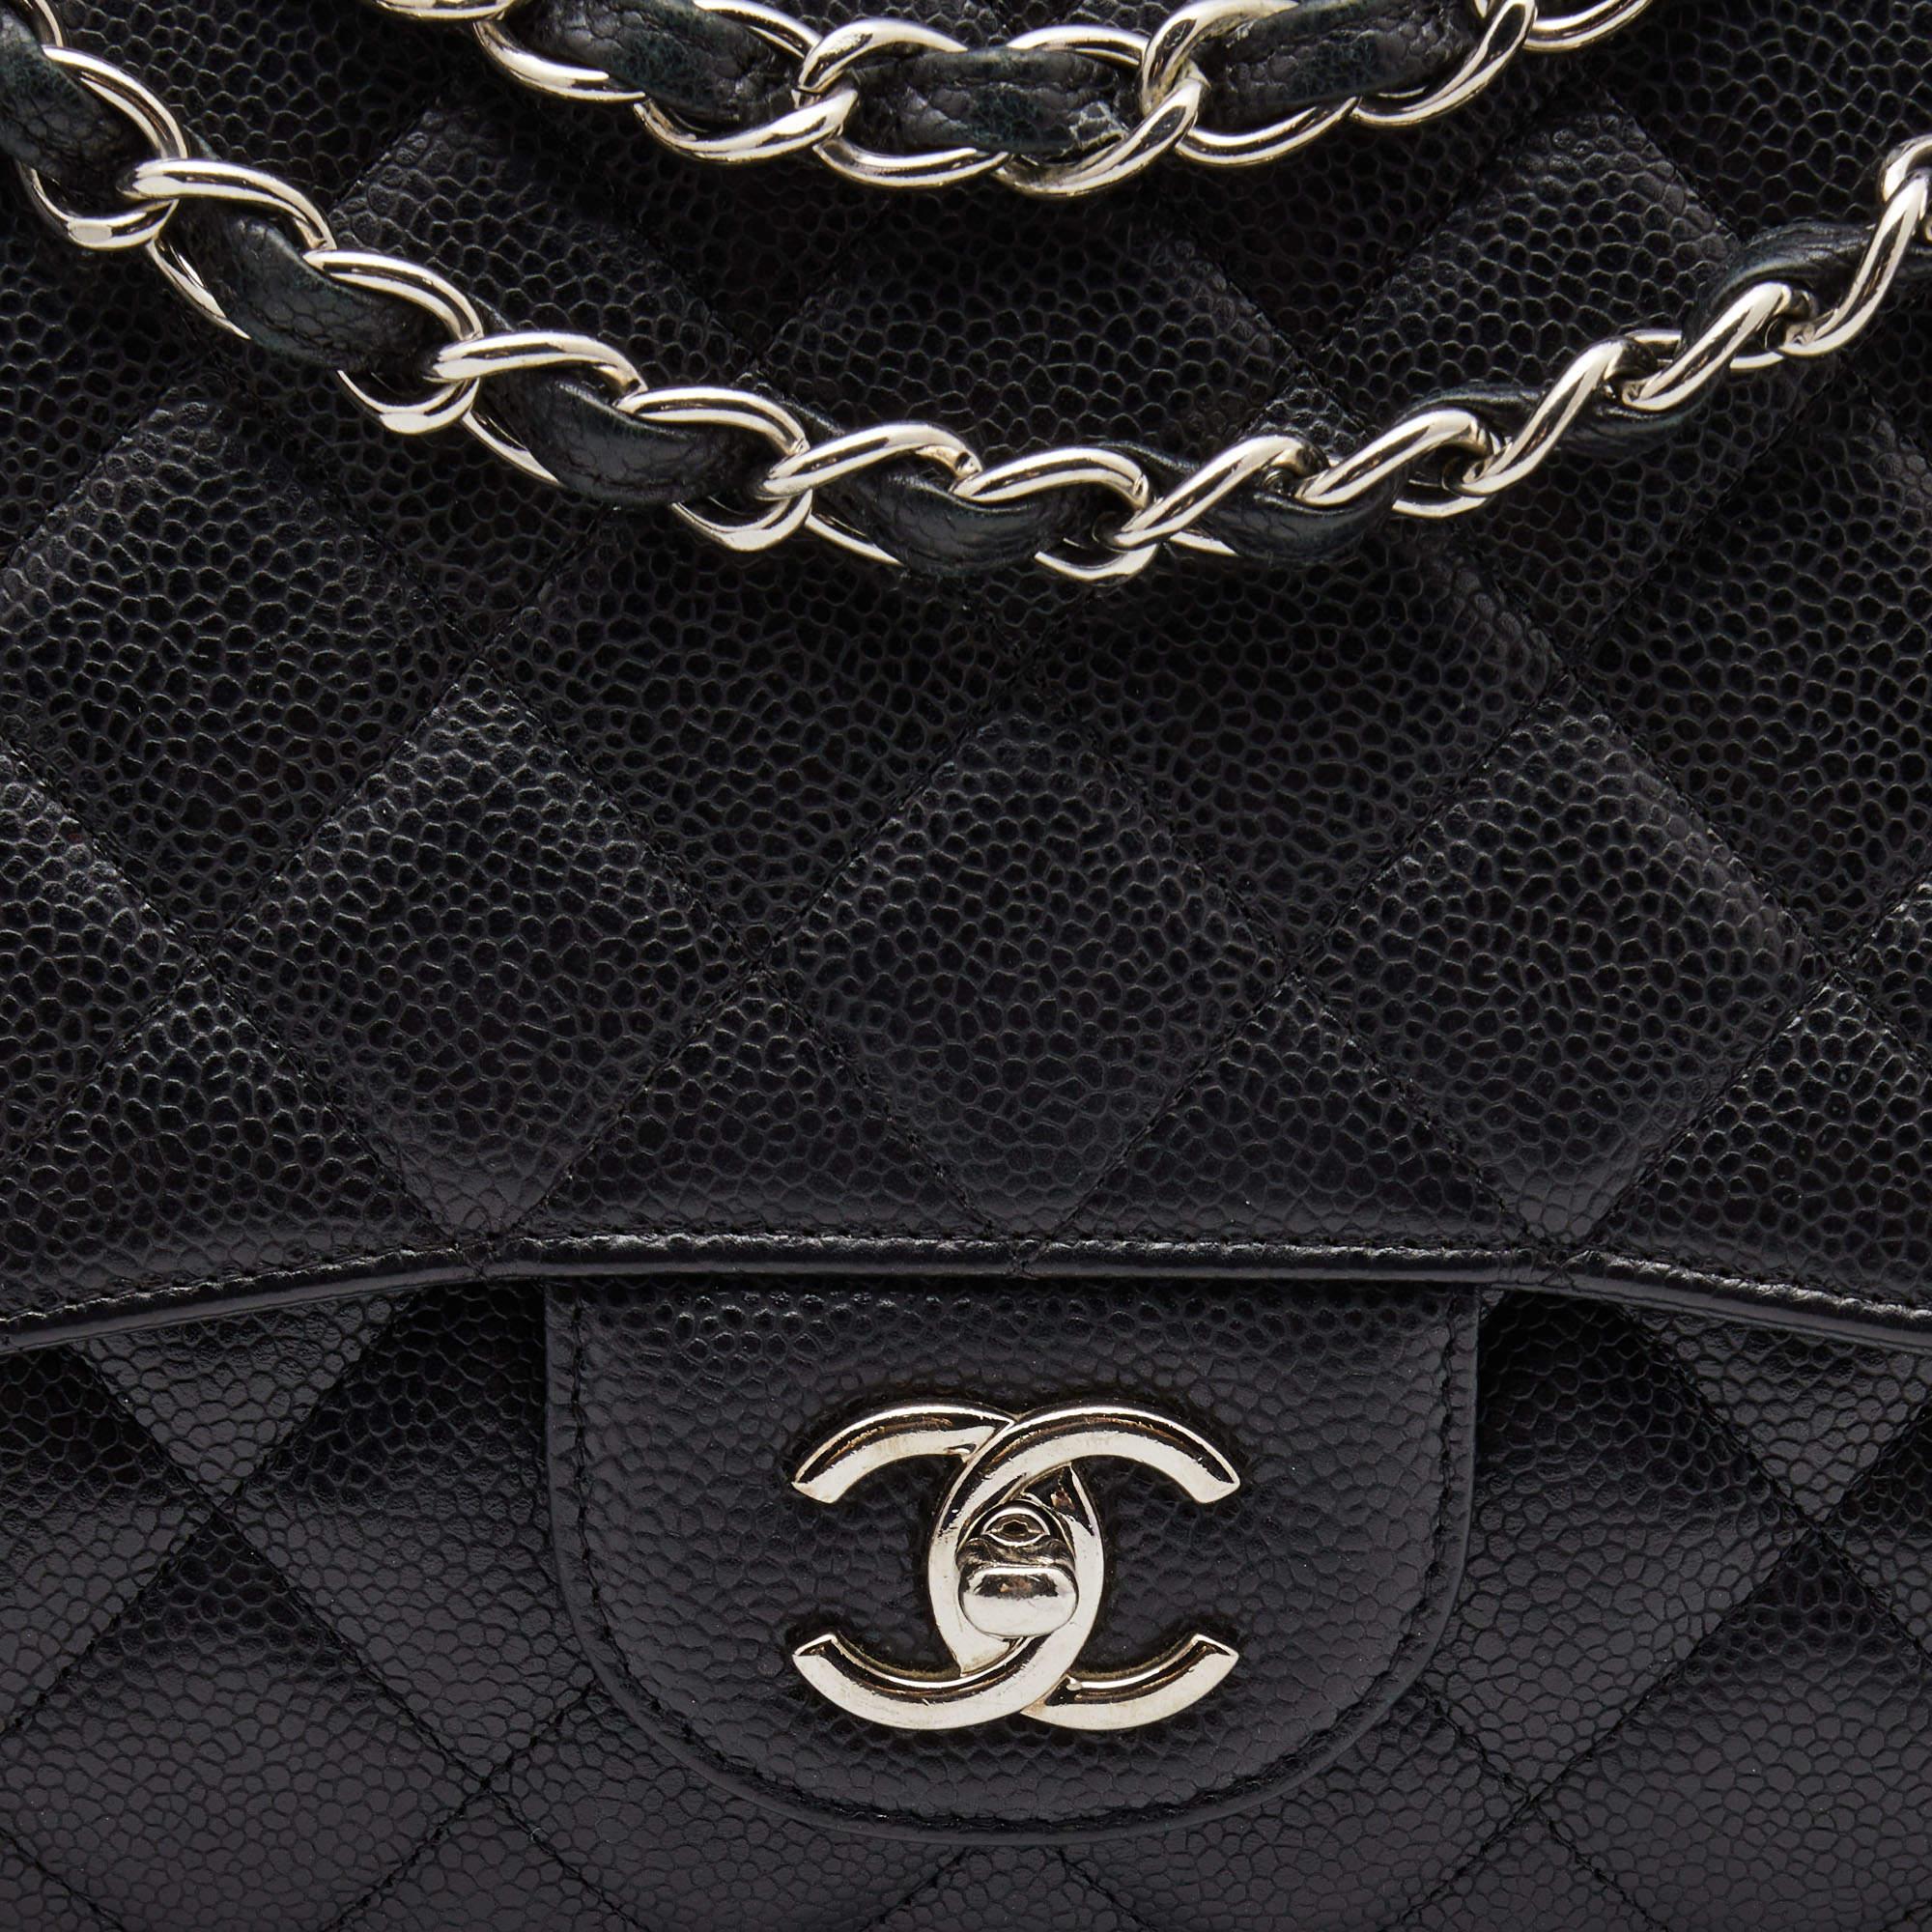 Chanel Black Quilted Caviar Leather Maxi Classic Single Flap Bag For Sale 4